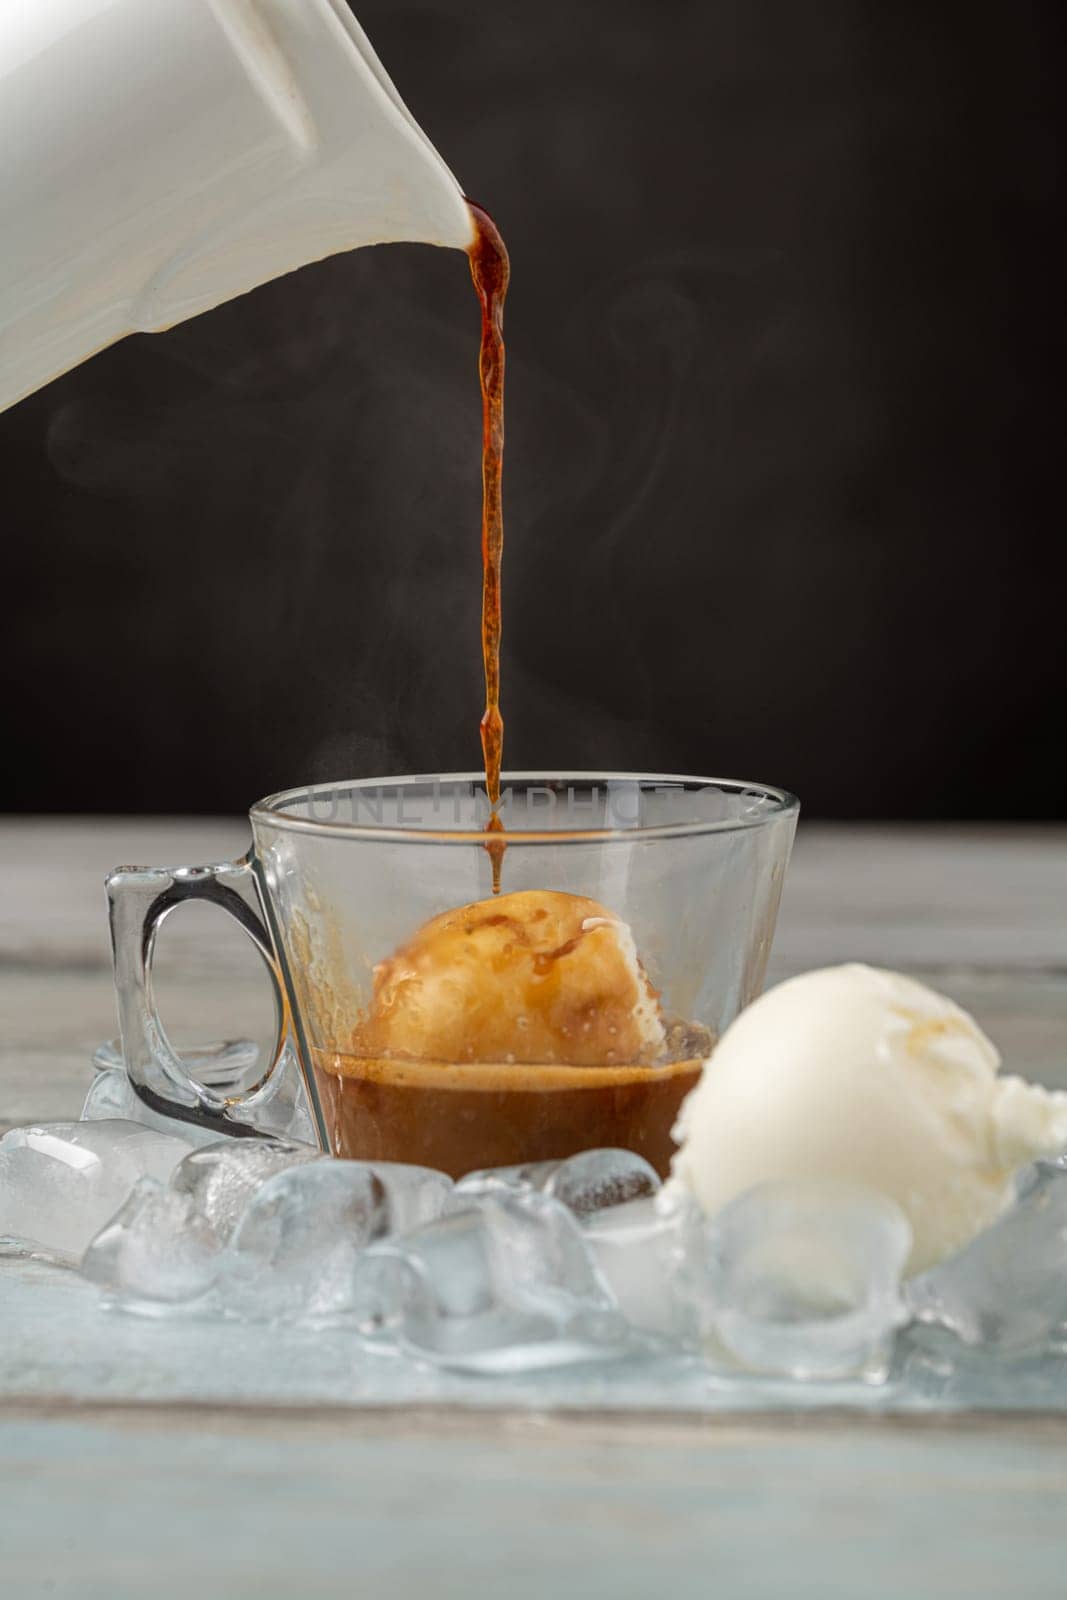 Affogato coffee with vanilla ice cream in a glass cup on wooden table